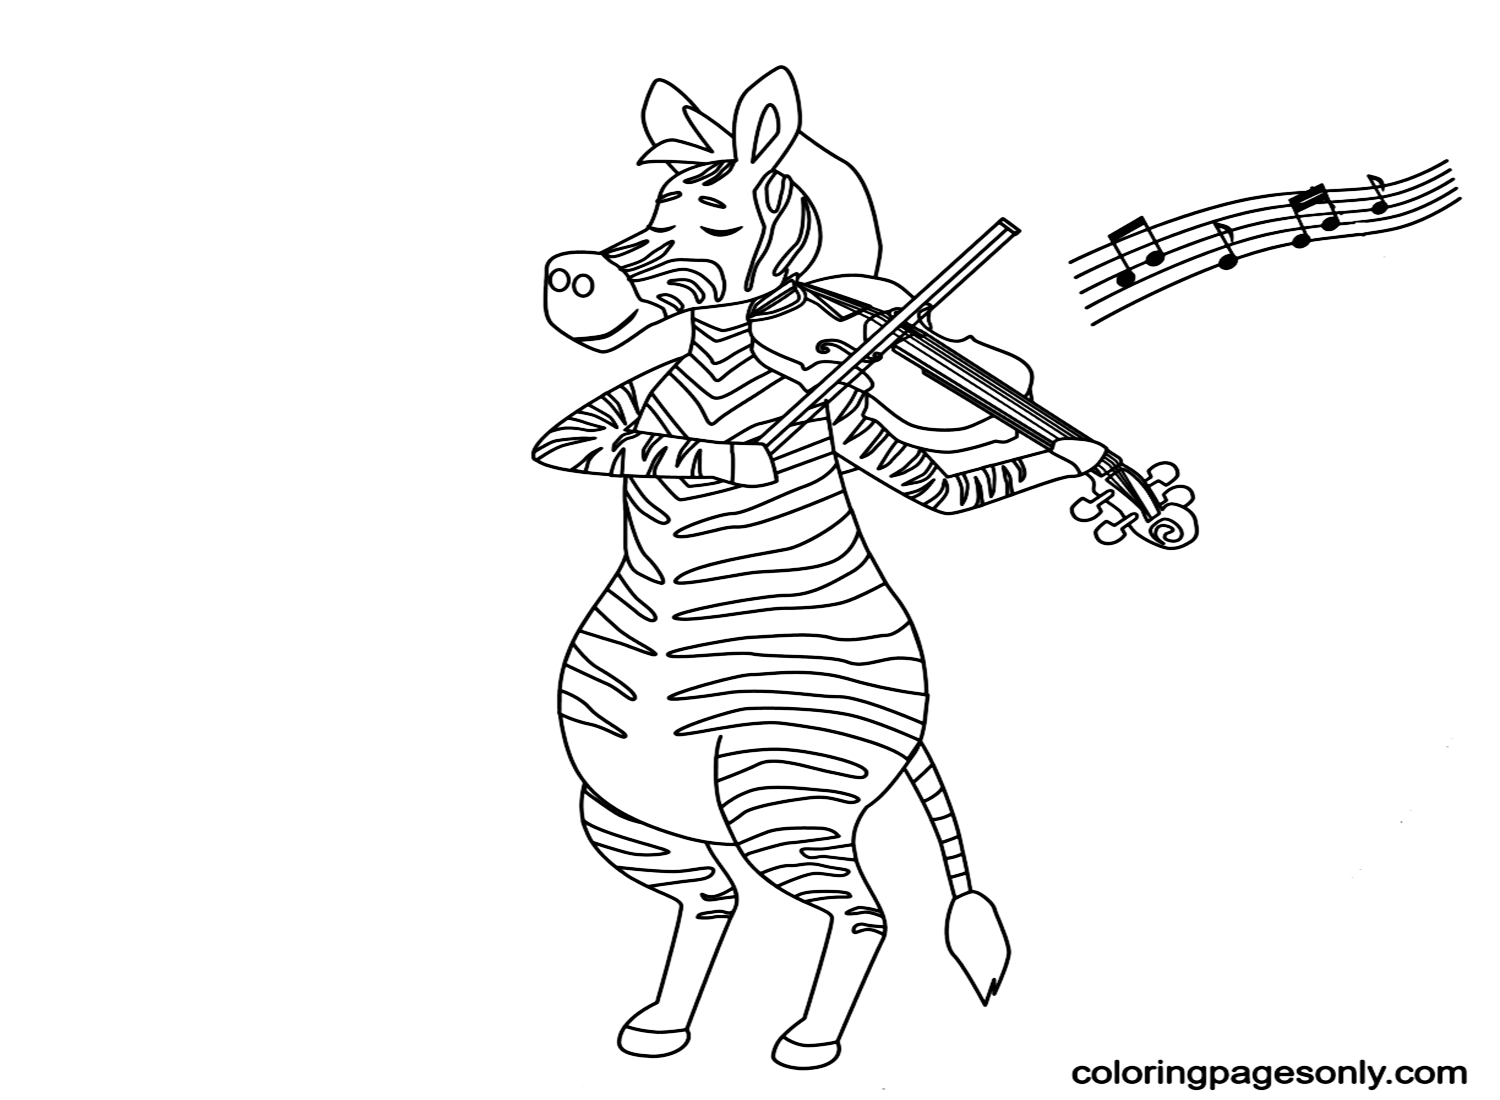 Zebra Playing Violin Coloring Pages